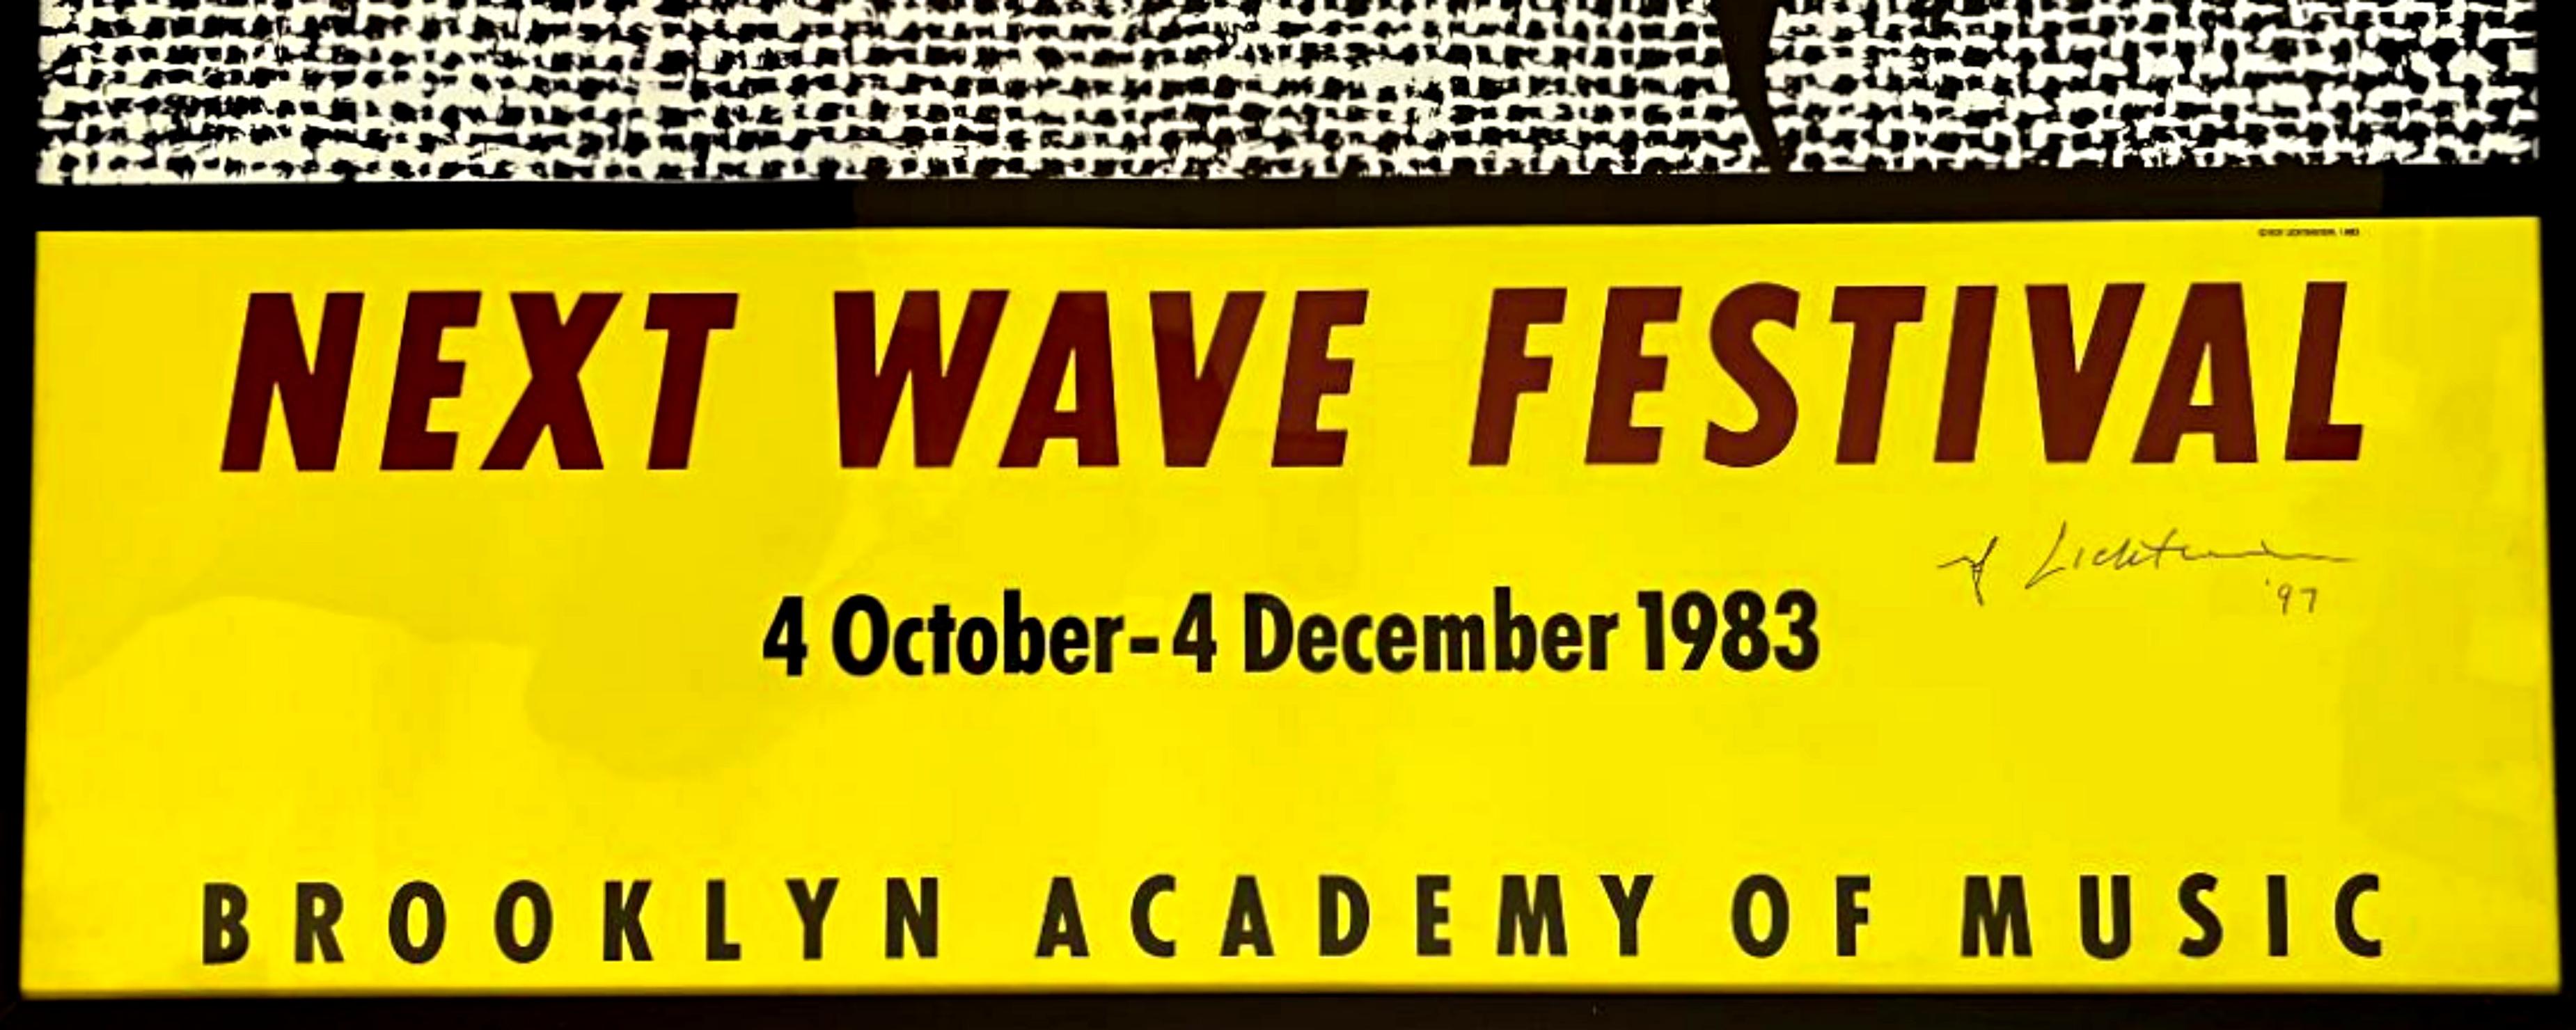 Next Wave Festival poster at BAM (Hand signed and dated '97 by Roy Lichtenstein) For Sale 5